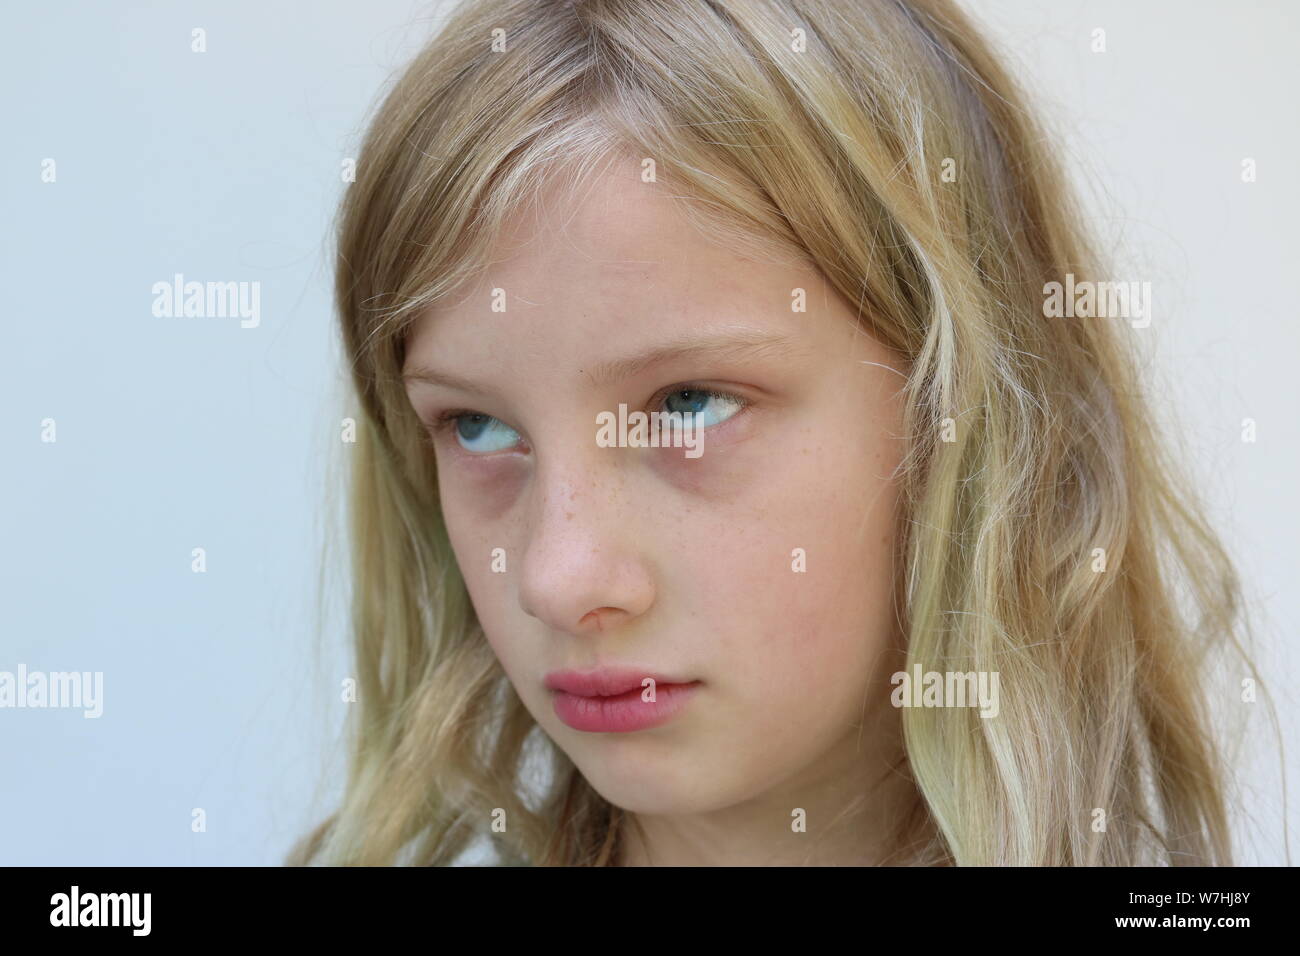 Portrait of an adolescent girl rolling her eyes Stock Photo